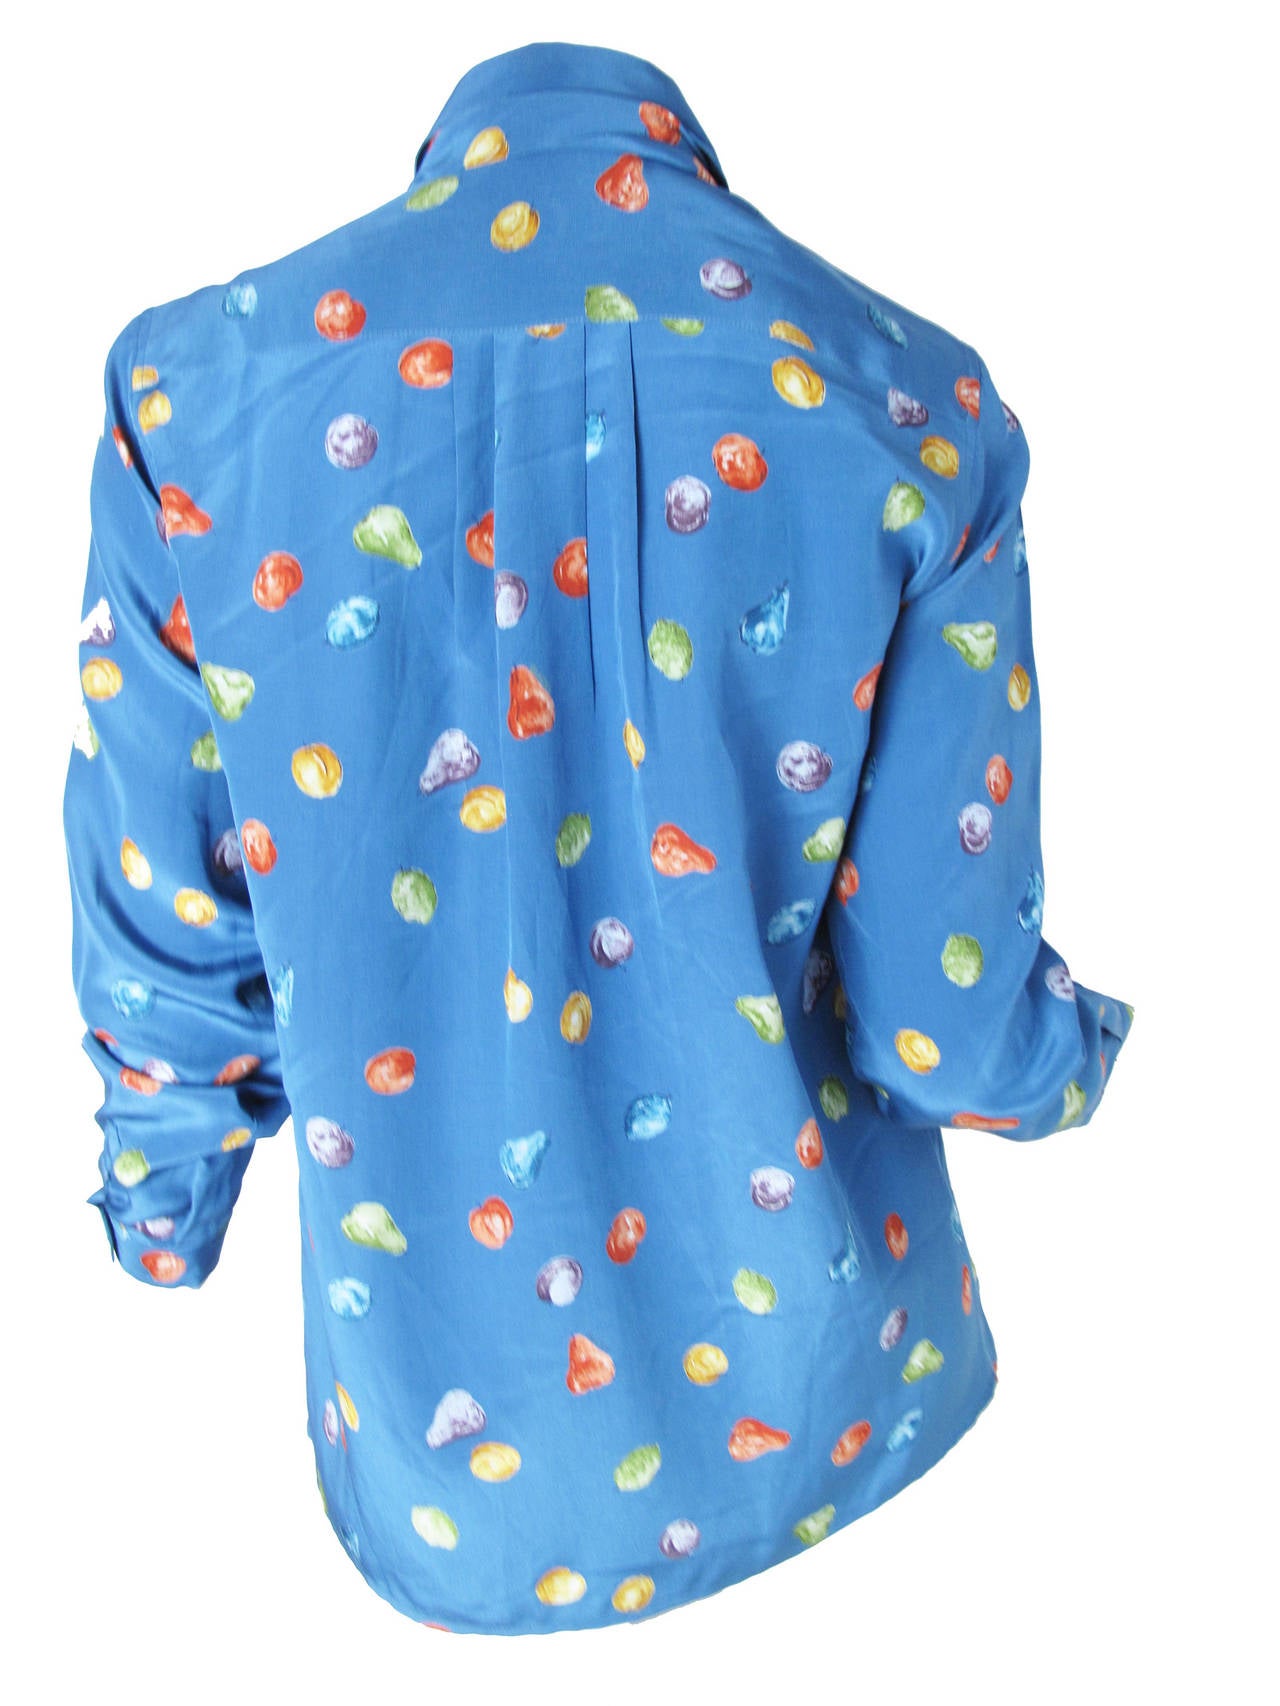 Gucci blue silk blouse with fruit print and removable tie for collar.  39